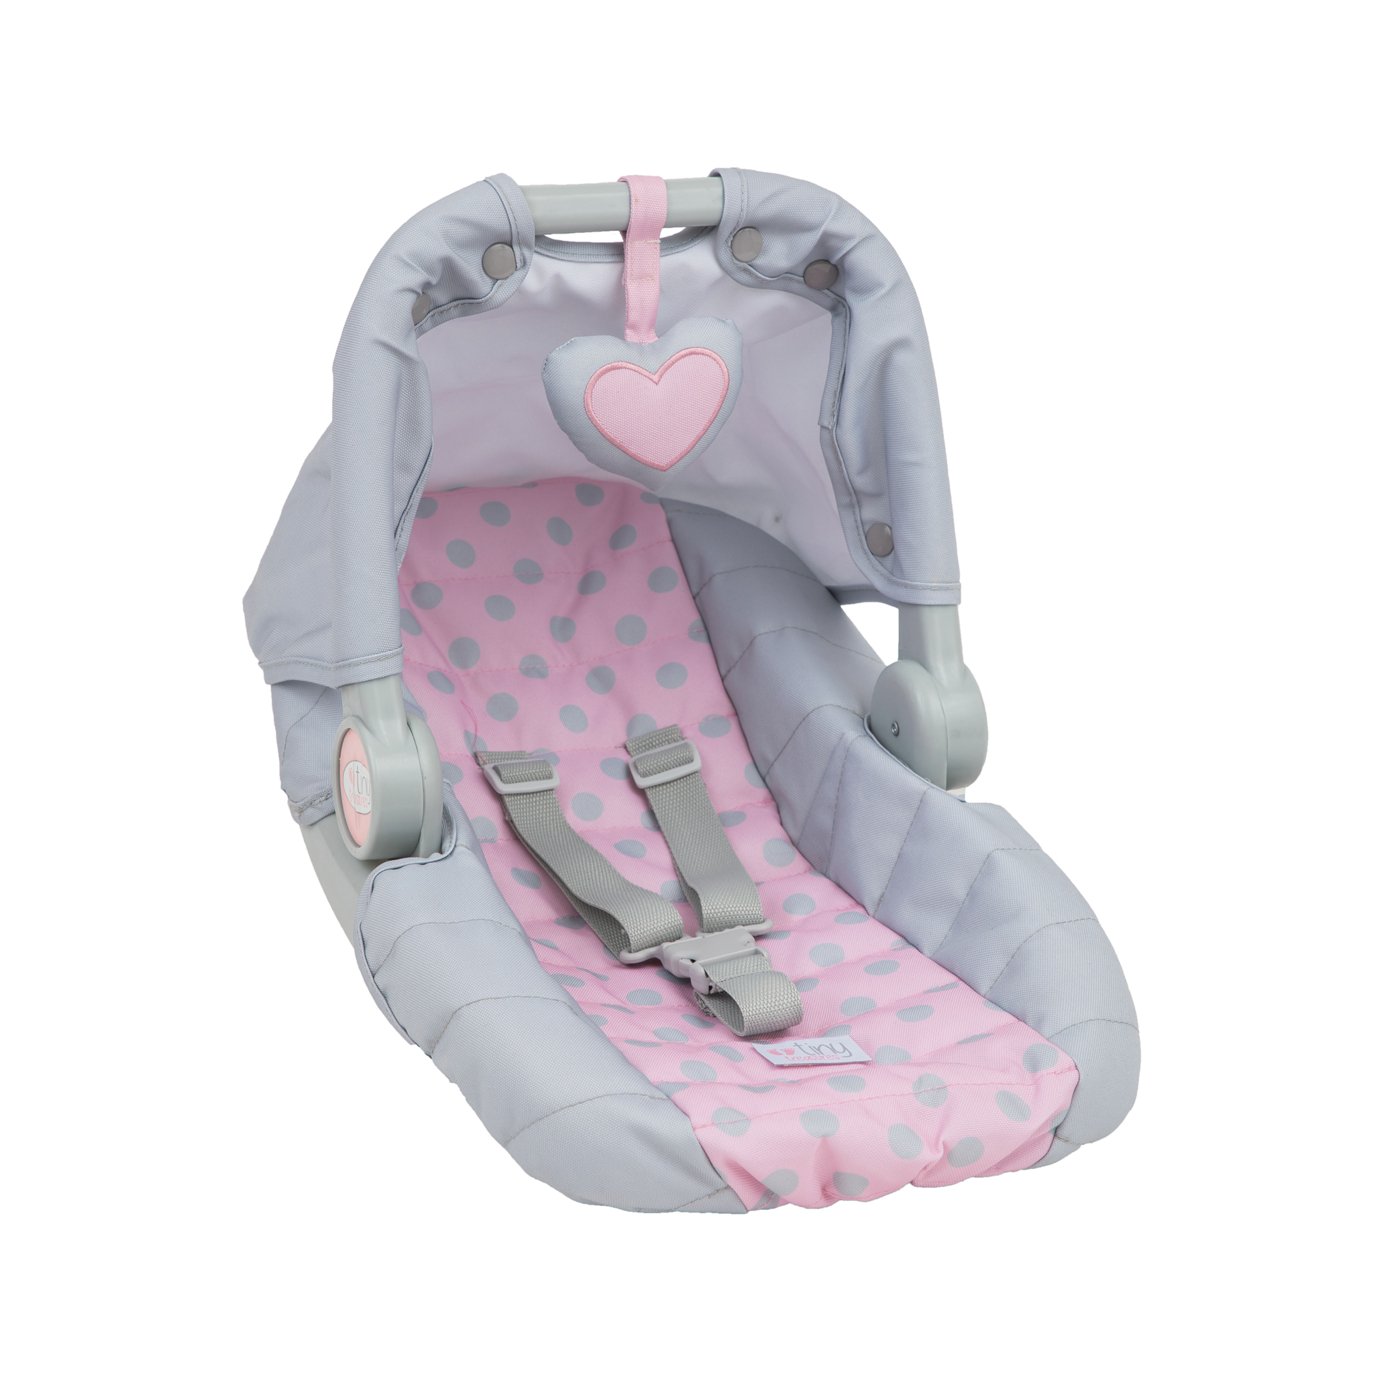 Chad Valley Tiny Treasures Doll's Car Seat Carrier Review